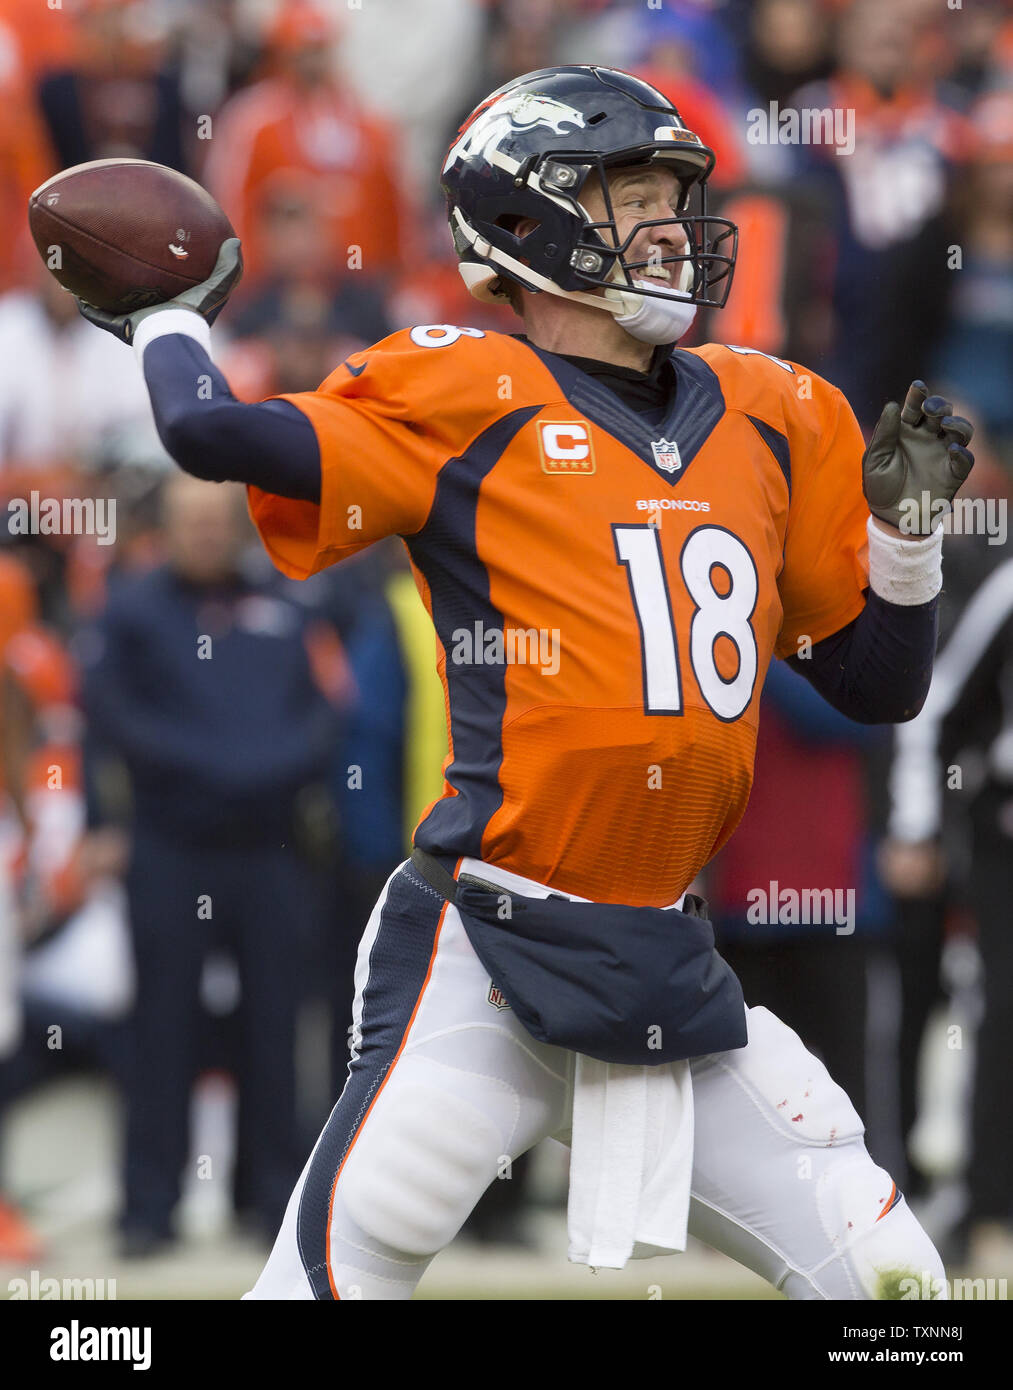 Denver Broncos Peyton Manning throws against the New England Patriots  during the AFC Championship game at Sport Authority Field at Mile High in  Denver on January 24, 2016. Denver advances to Super